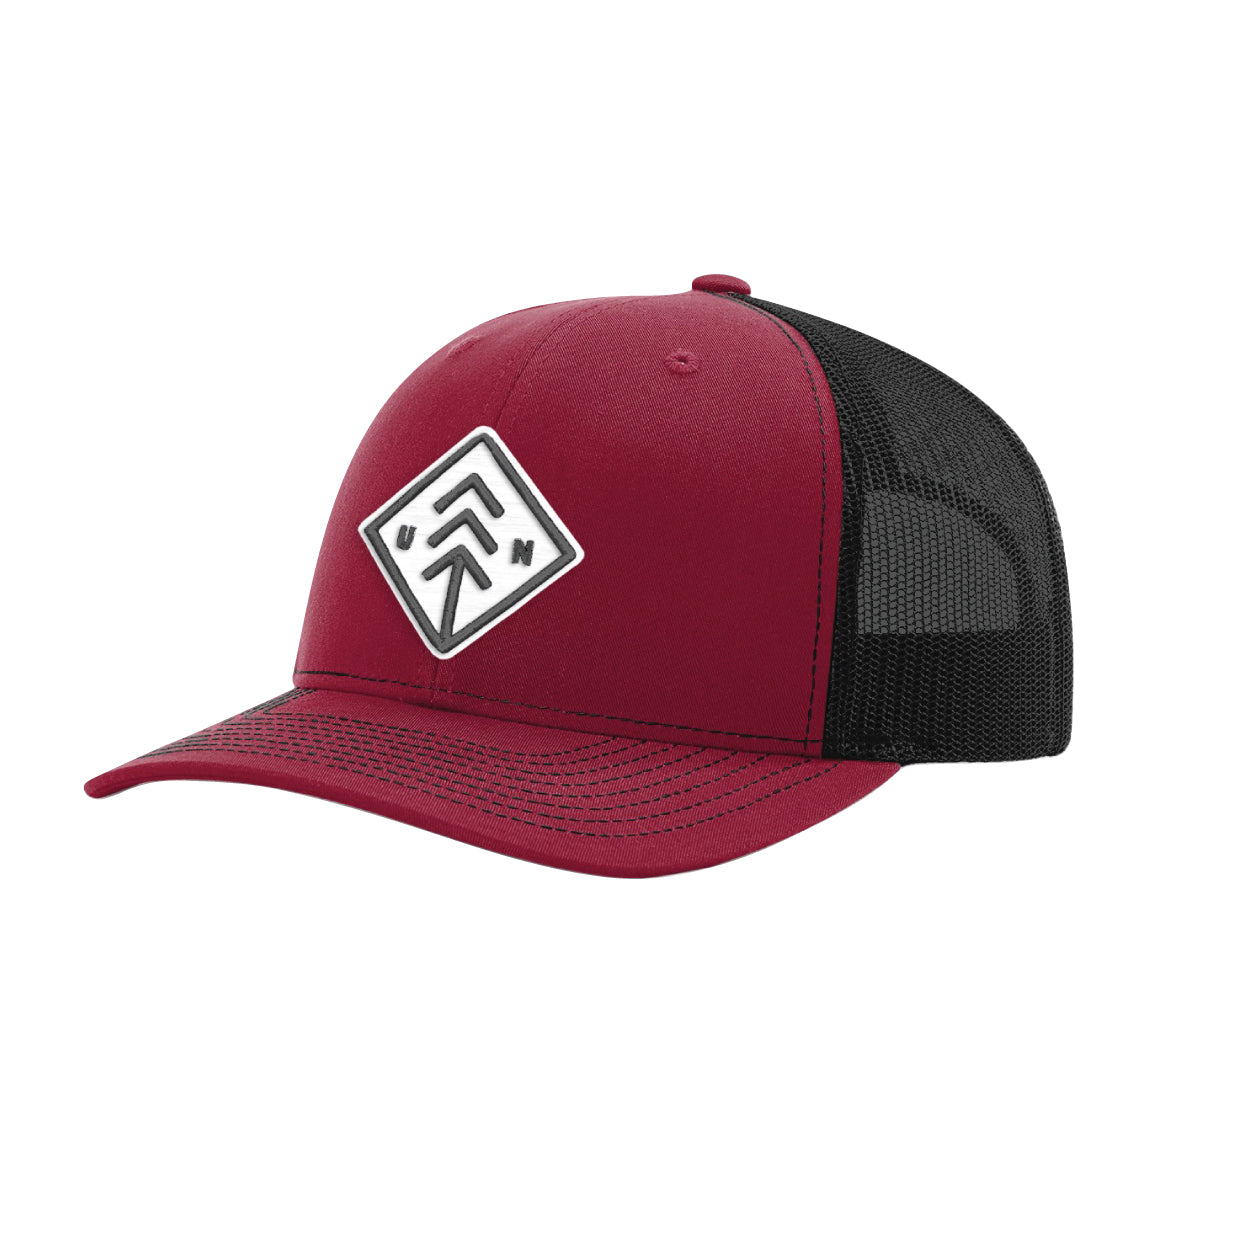 St. Croix River Snapback – Up North Trading Company